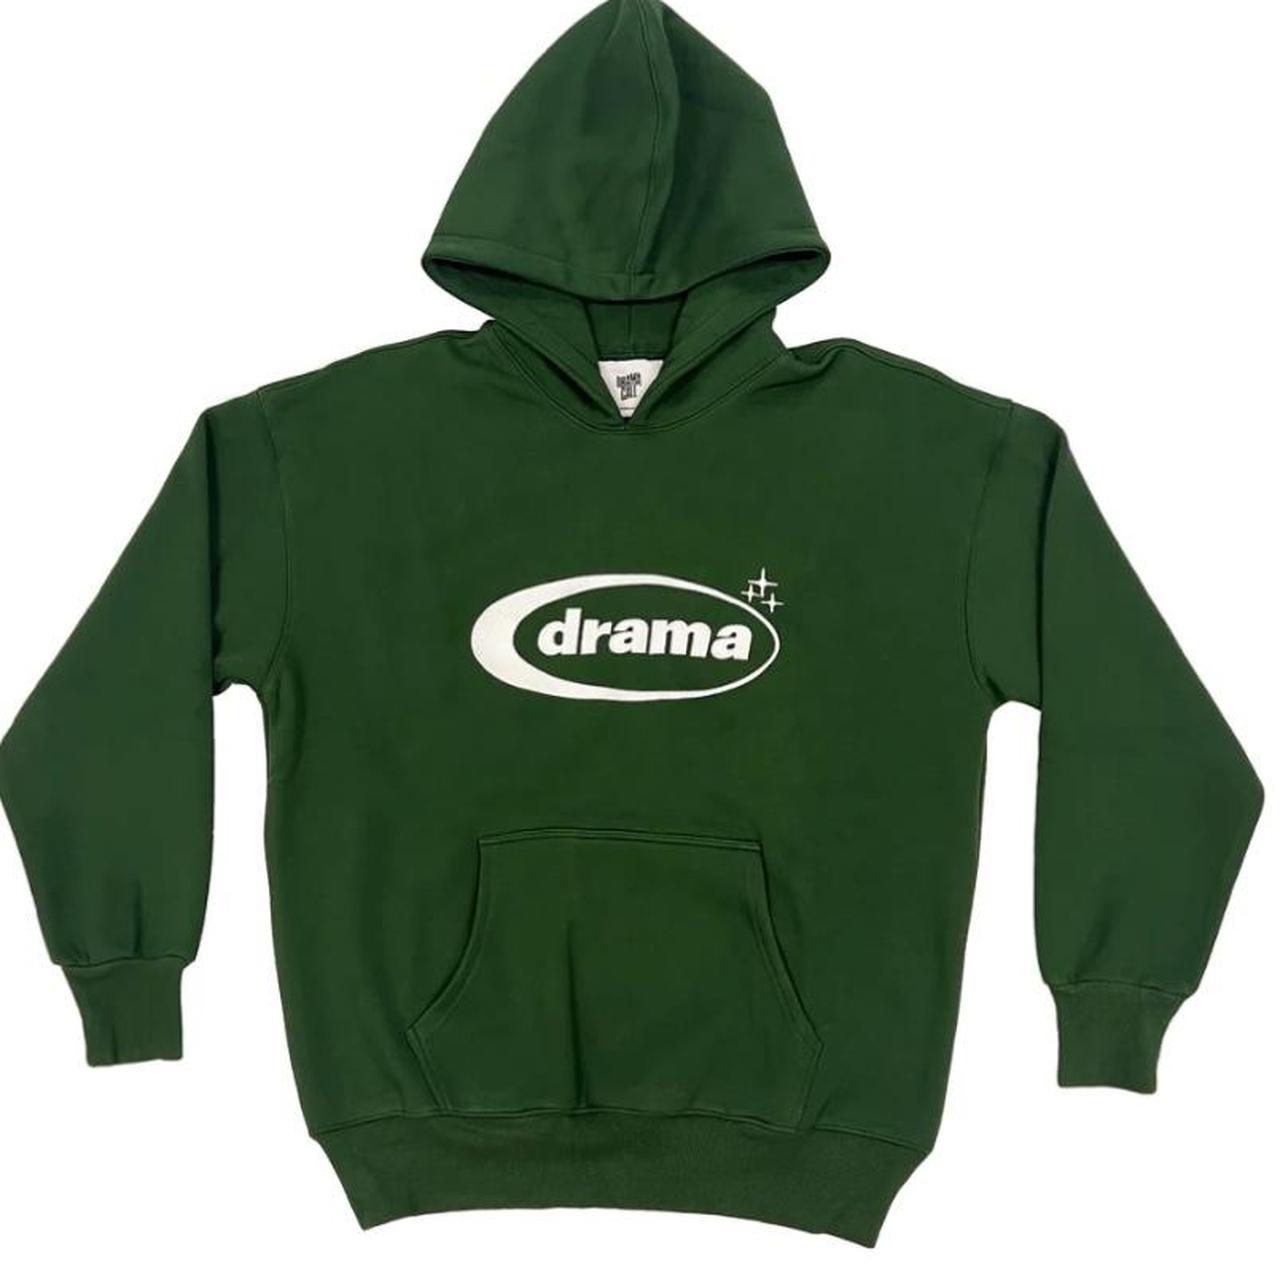 Drama call green hoodie 🎭 , Size Large (oversized